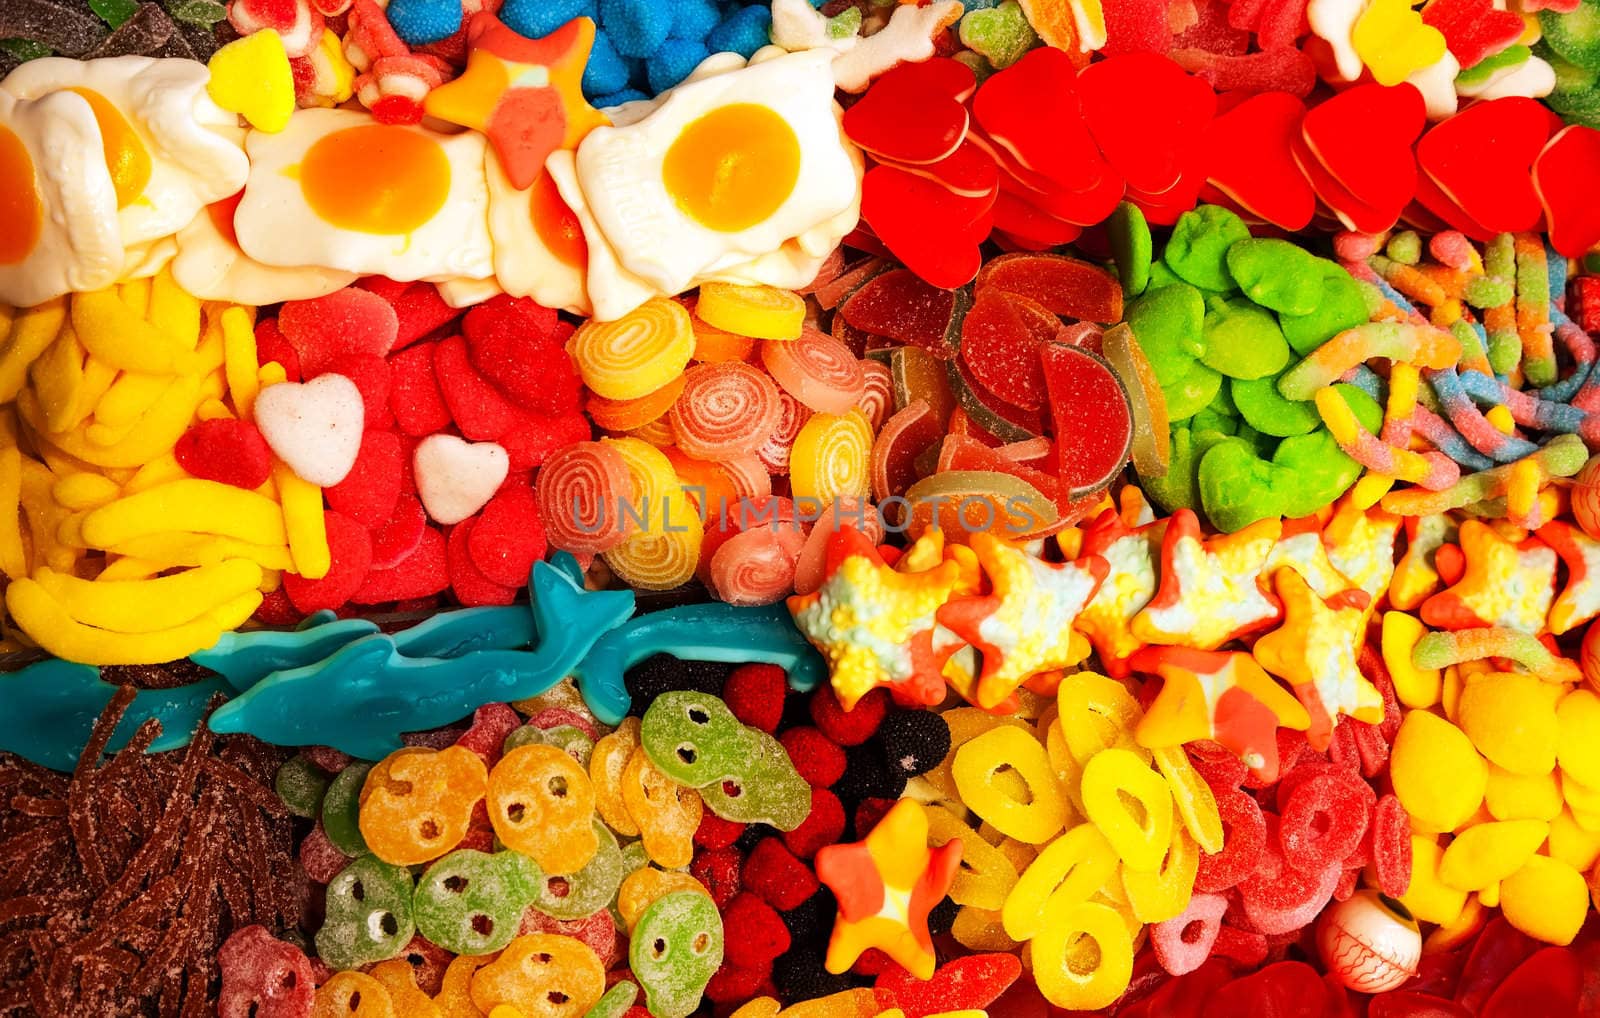 Spanish Candy in the Shape of Different Food Shapes, Barcelona, Spain